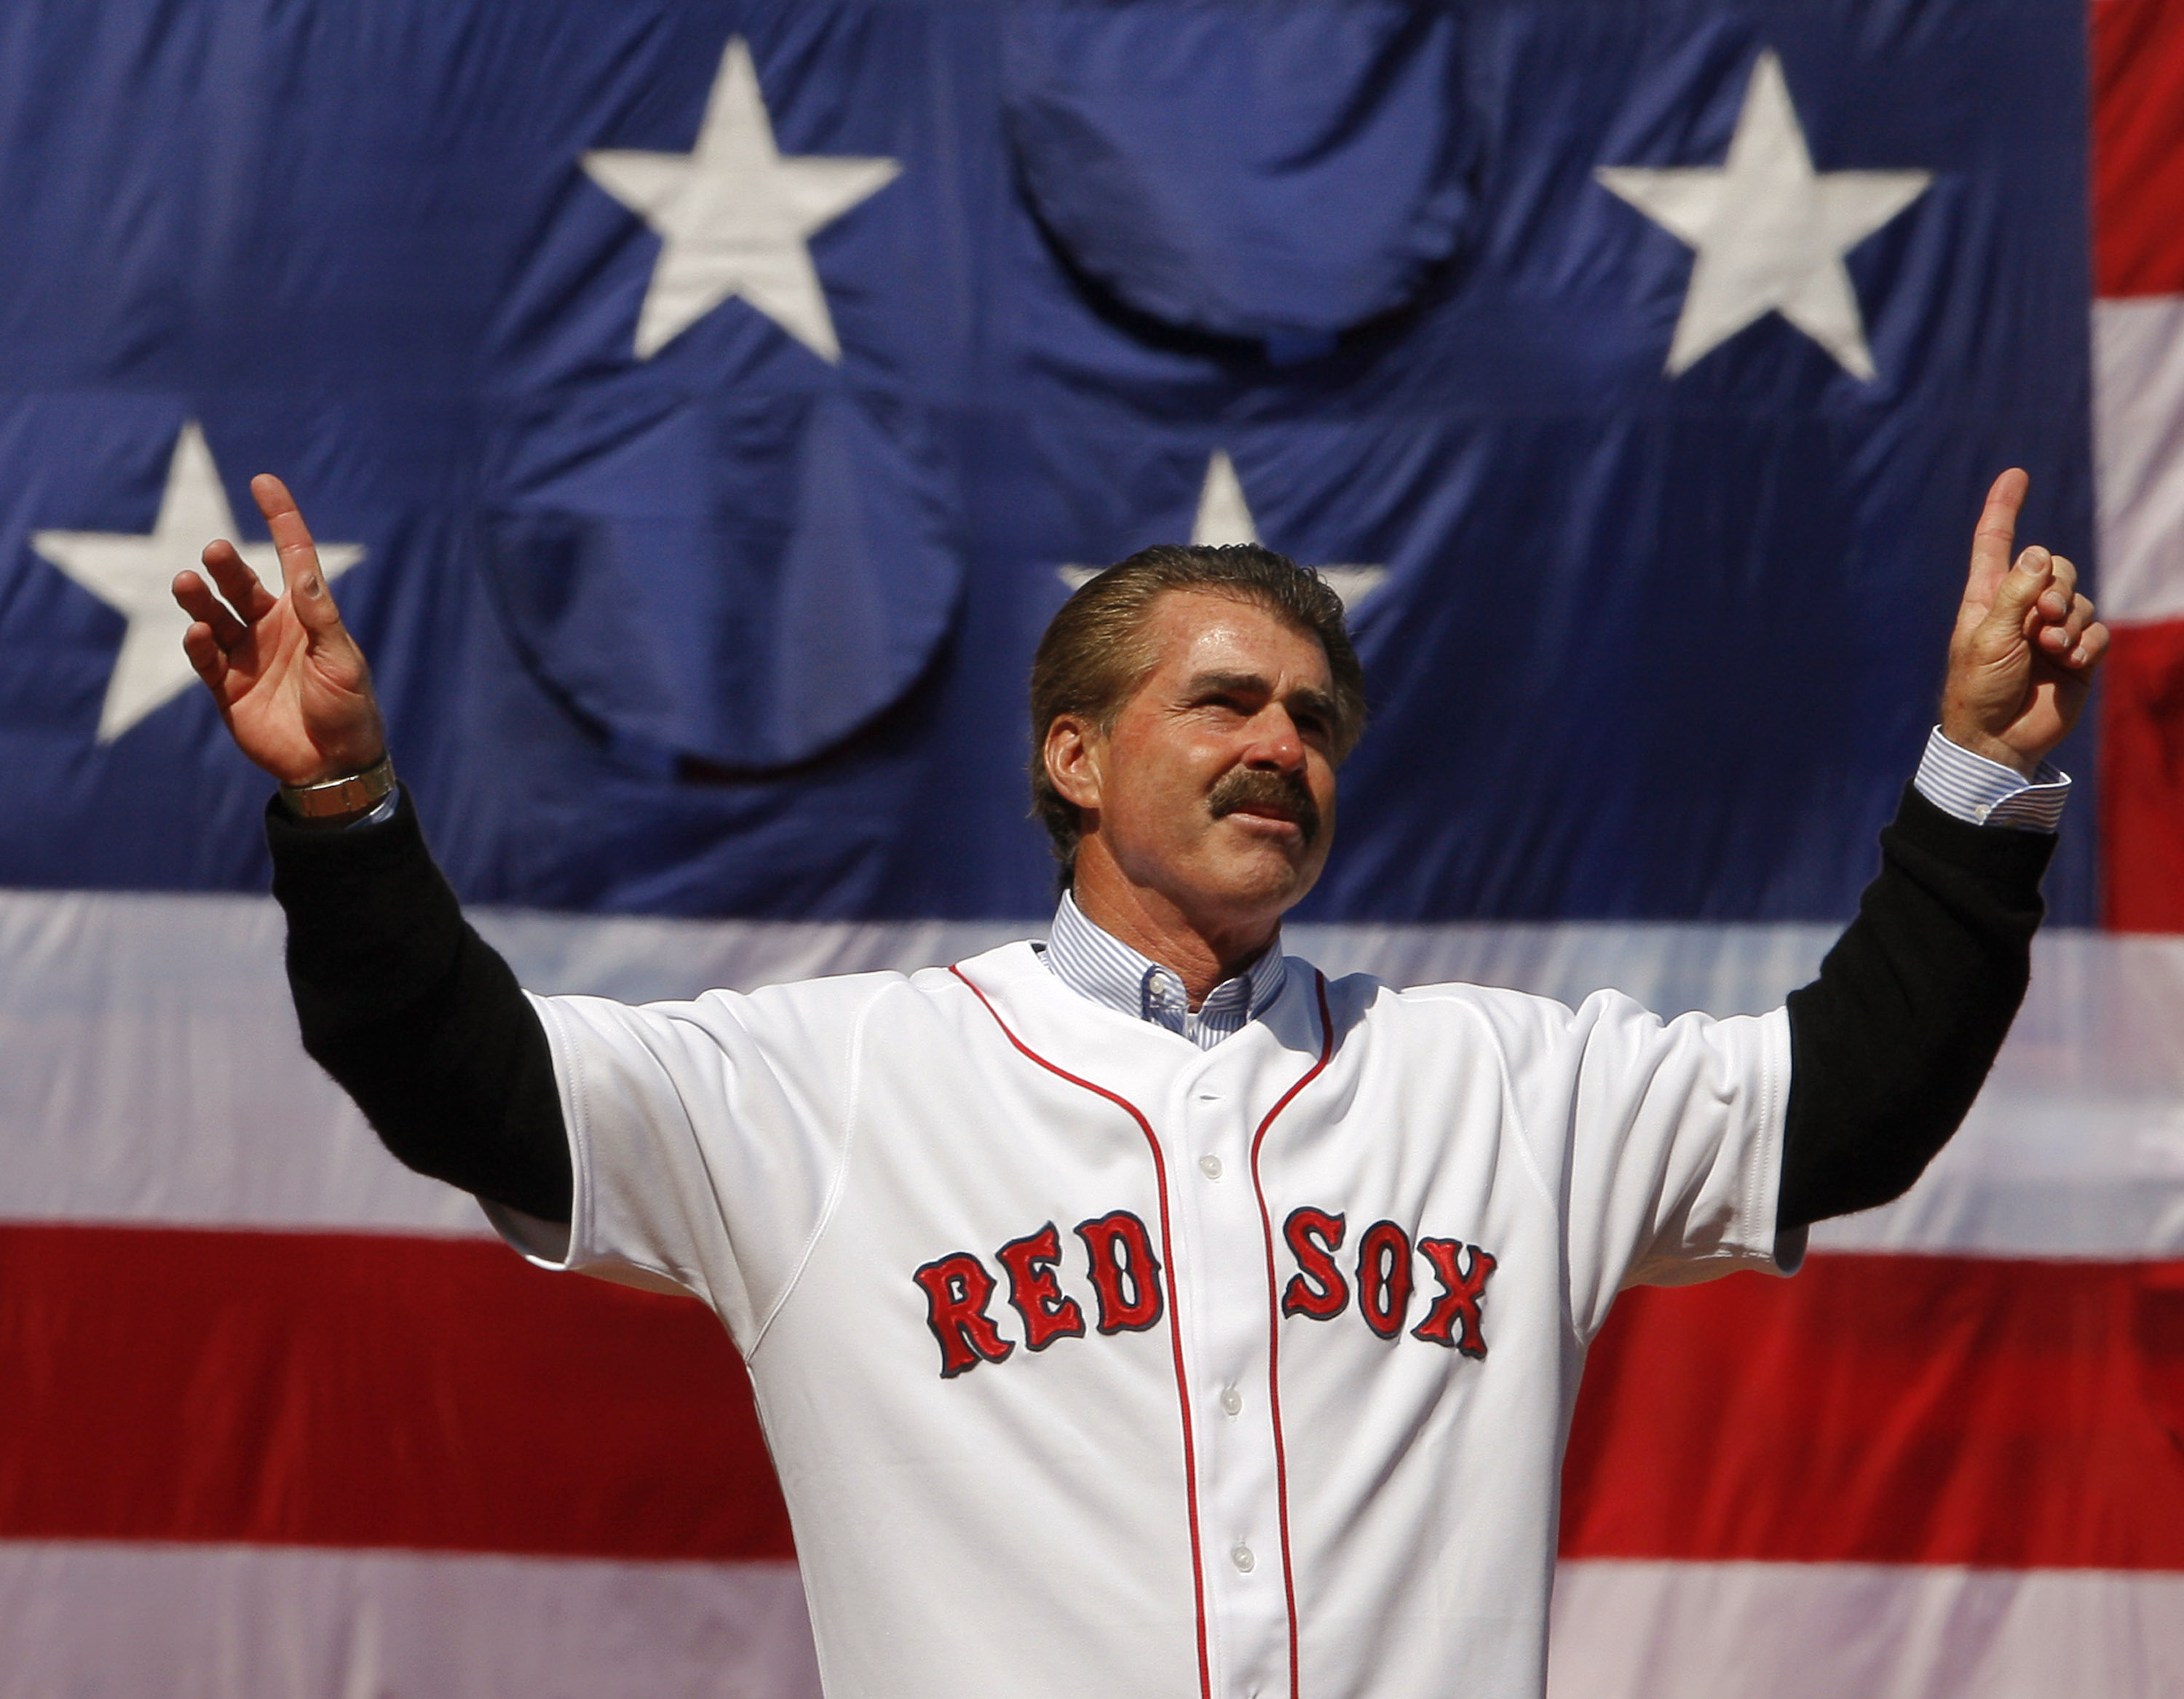 Mookie Wilson discusses special relationship with Bill Buckner